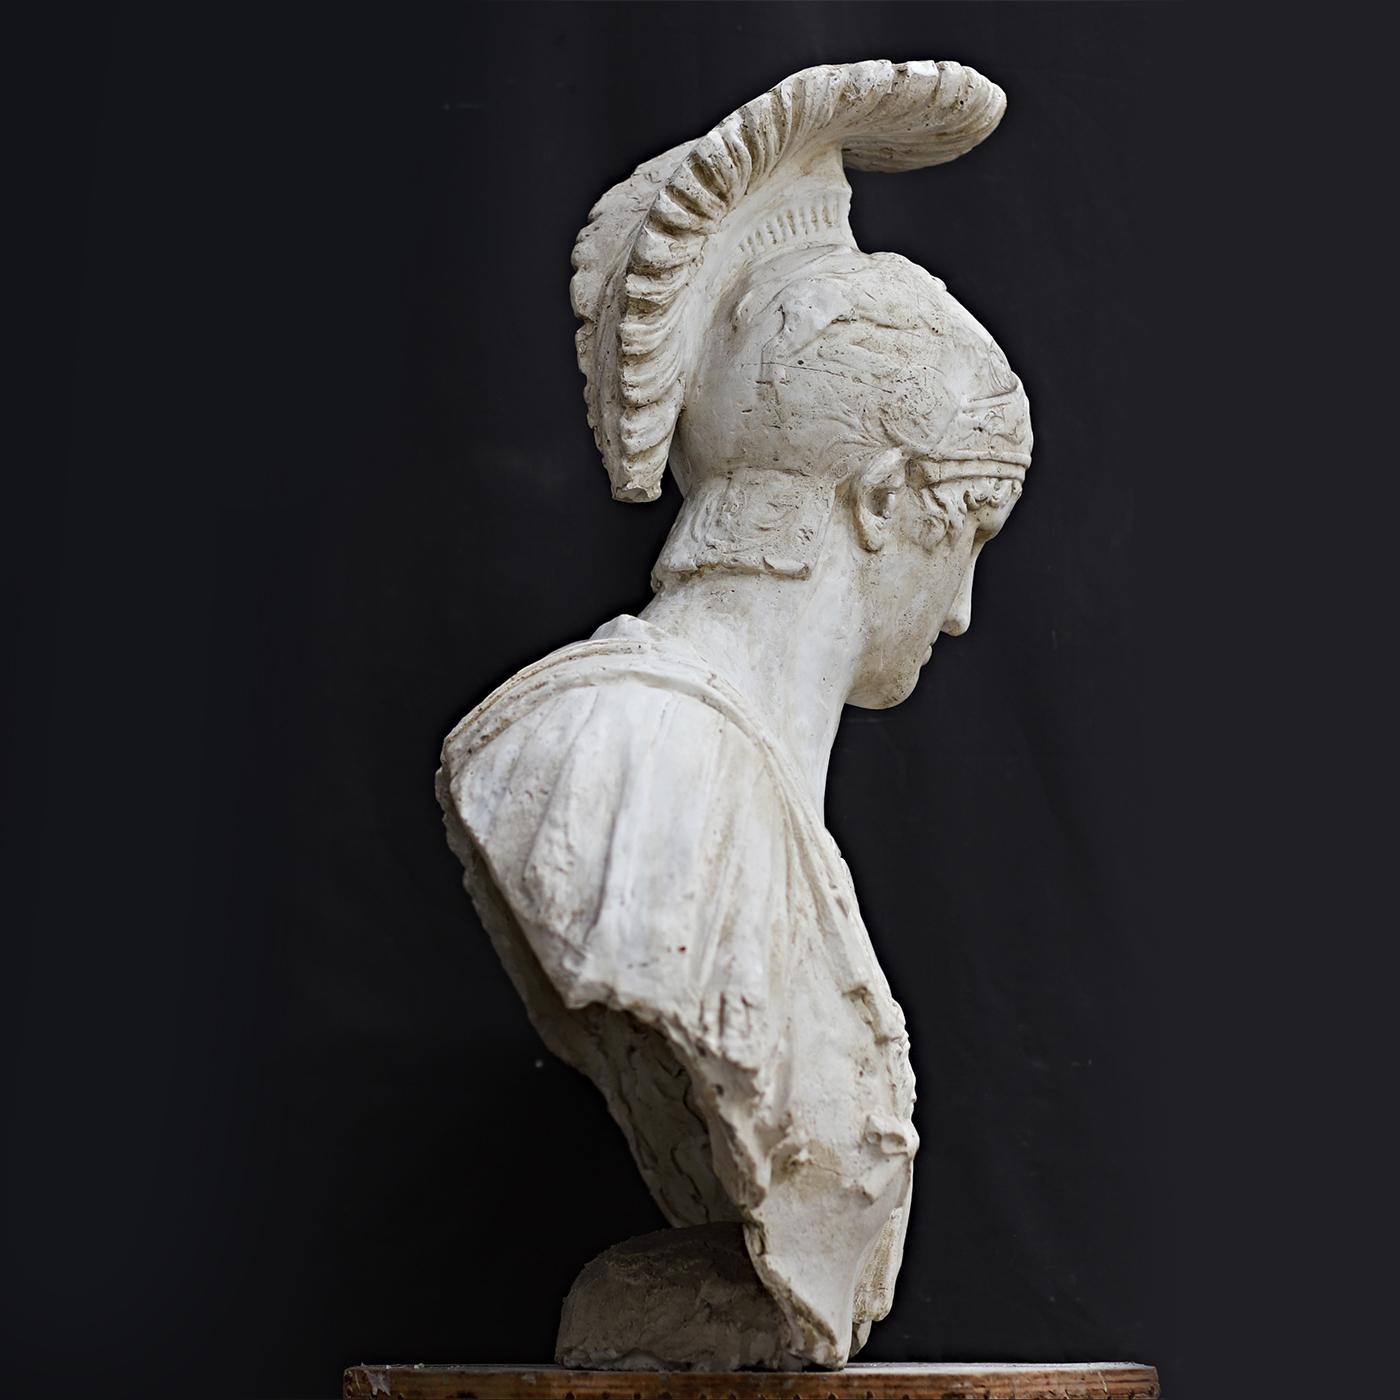 A stupendous representation of Ares, half-brother of Athens, son of Zeus and Hera, and the God of War, this sculpture will make a unique and sophisticated addition to a personal collection. Handcrafted of gypsum, the bust depicts a young, powerful